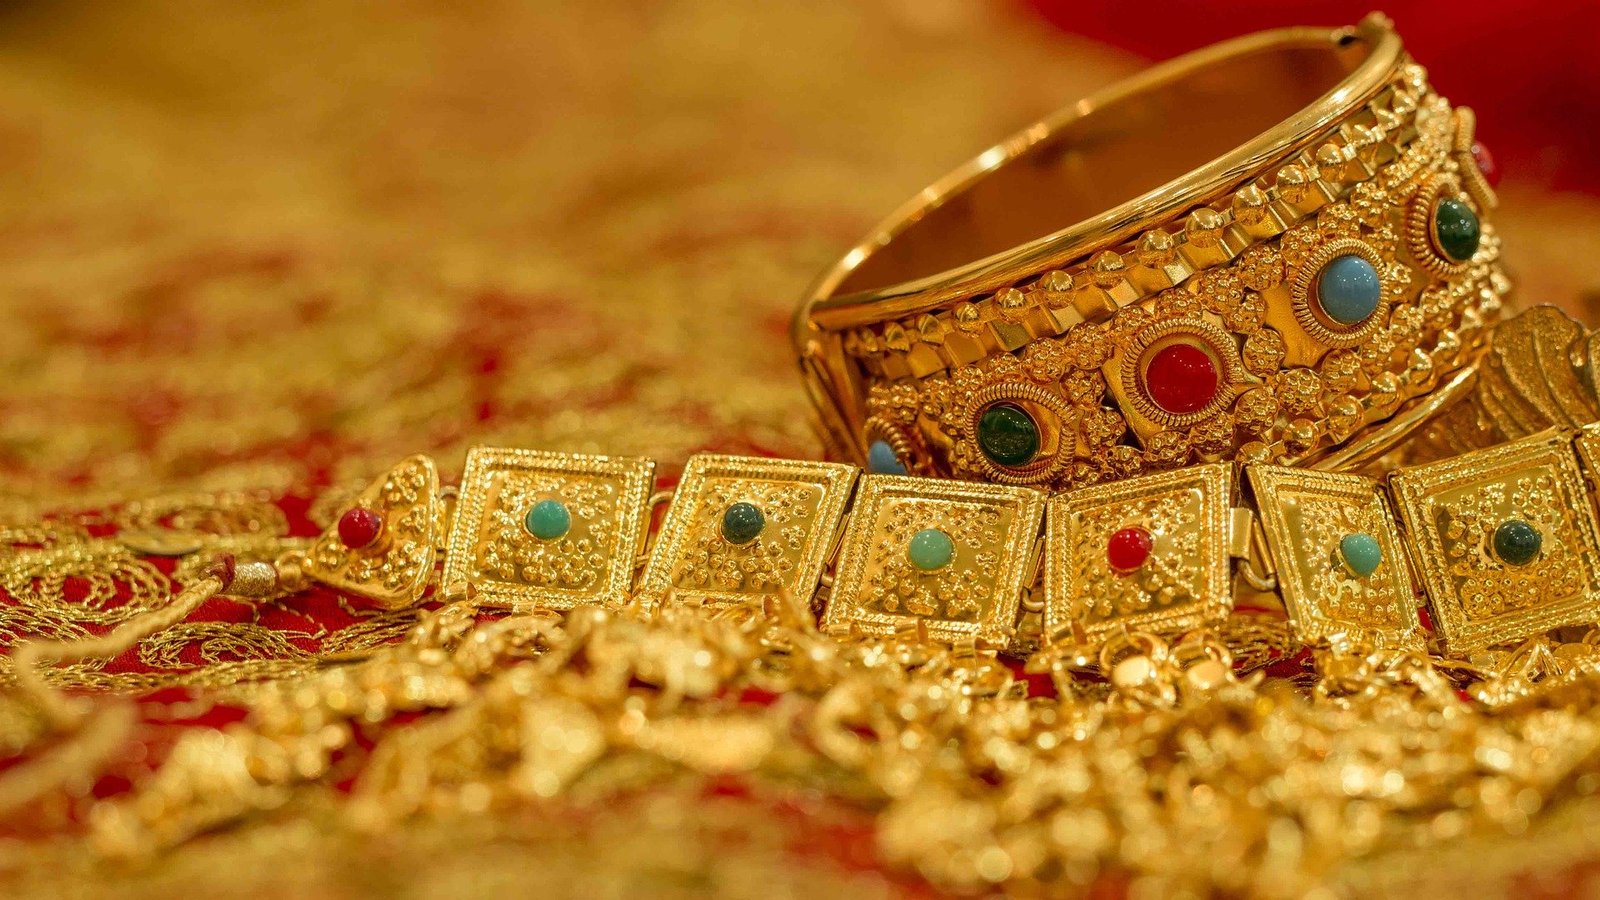 Pakistani Gold Price Approaches Rs. 224,000 Per Tola as Rupees Drop in Price 